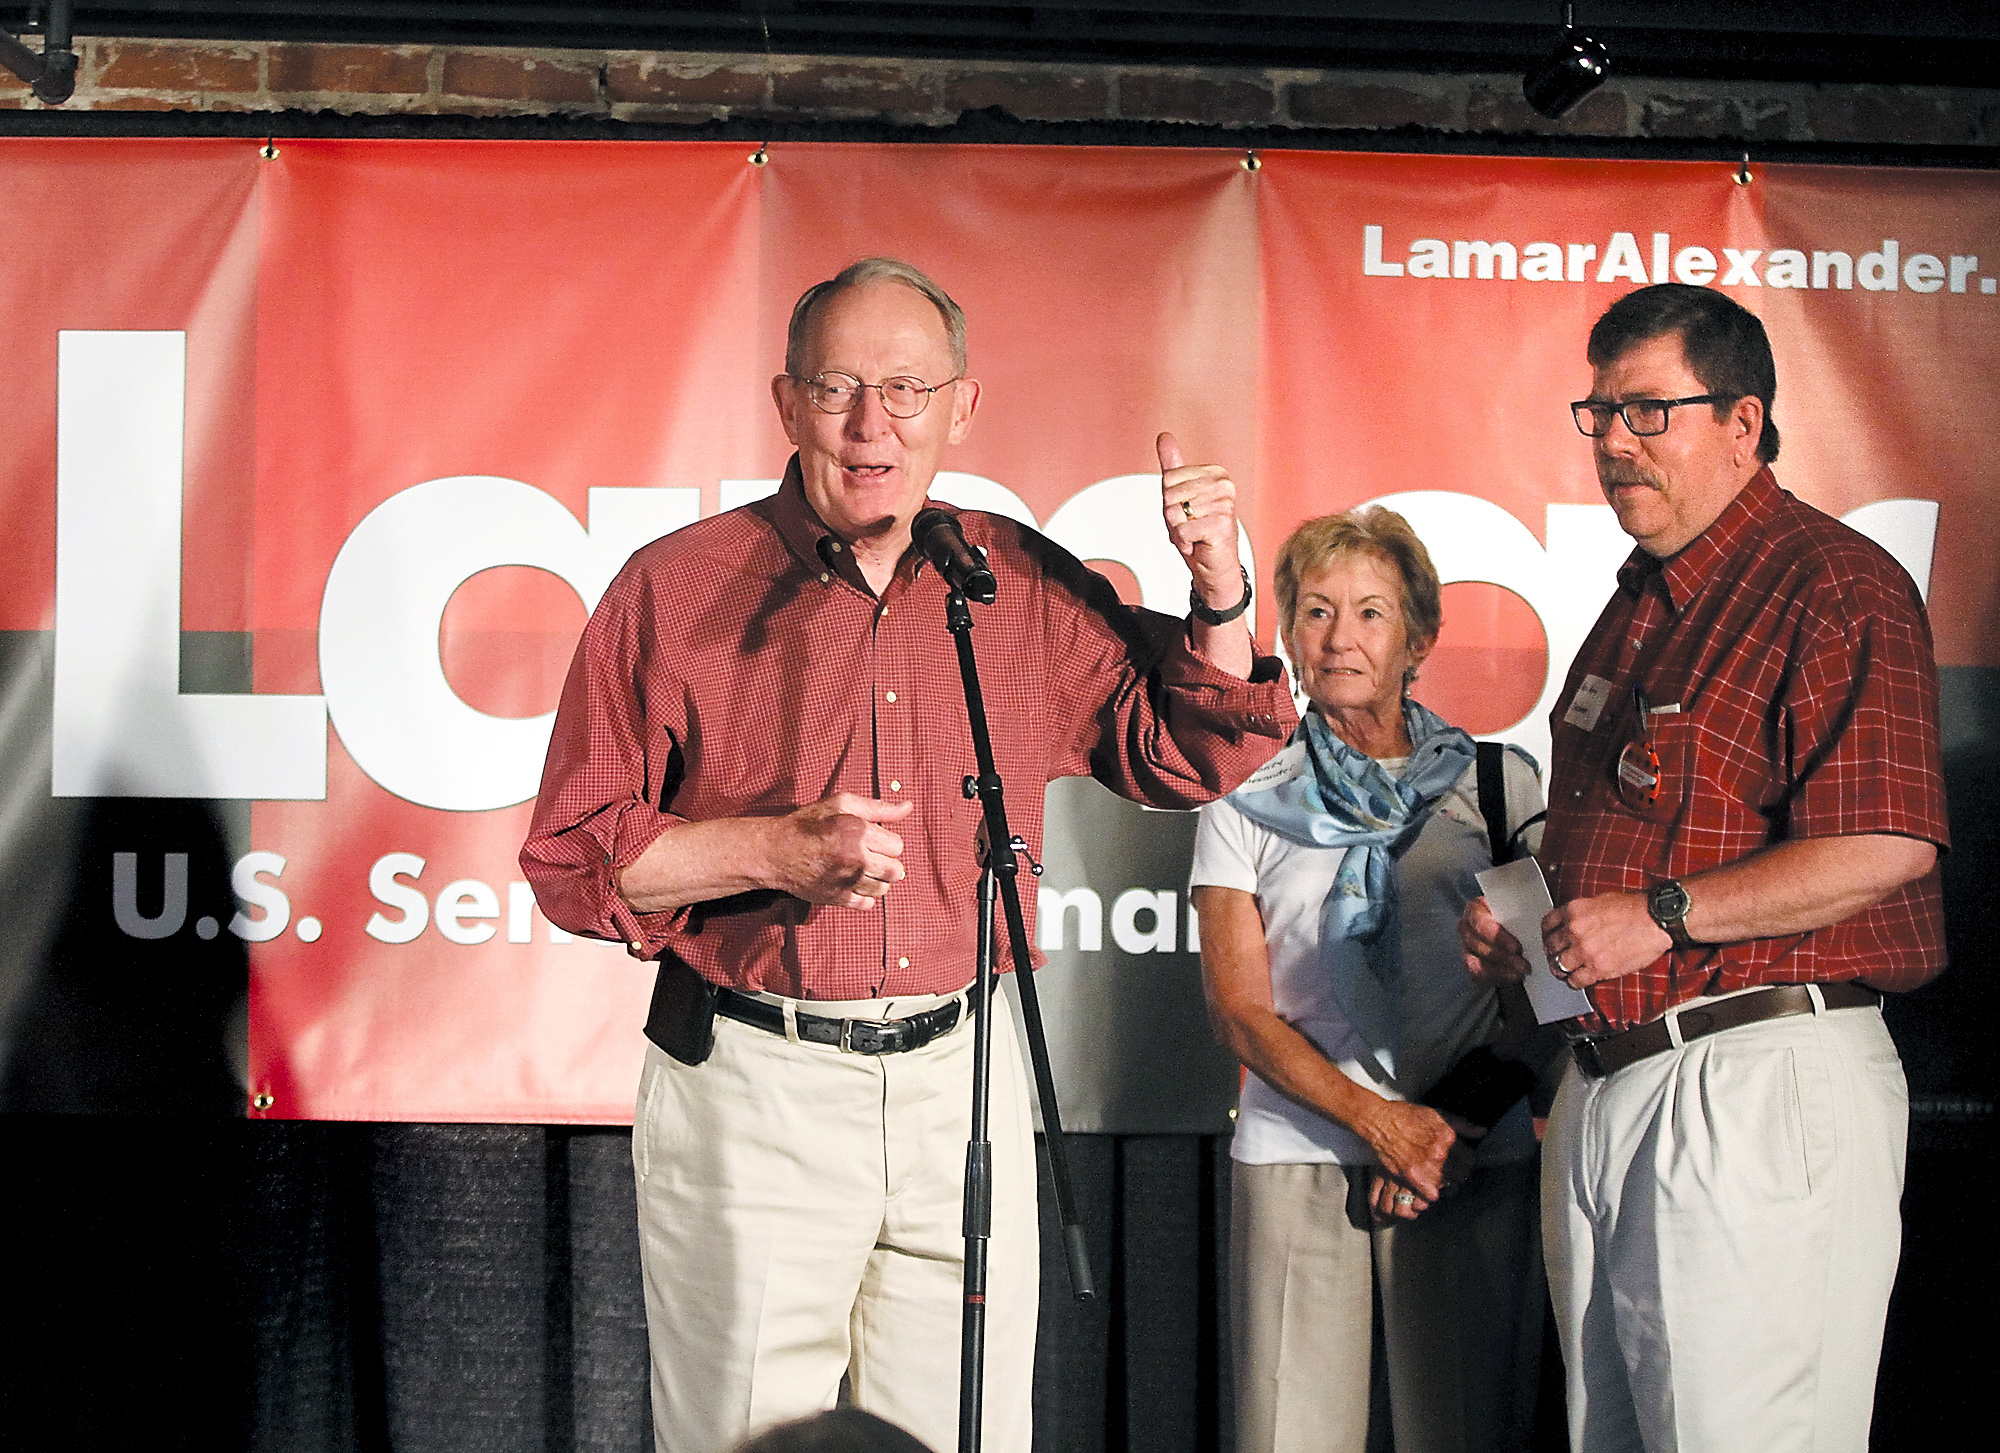 U.S. Senator Lamar Alexander announces the kickoff of his "Standing Up for Tennessee" bus tour at Sullivan's Restaurant in his hometown of Maryville, Tenn., as his wife Honey and State Rep. Art Swann look on on July 25, 2014. (Tom Sherlin—The Daily News/AP)